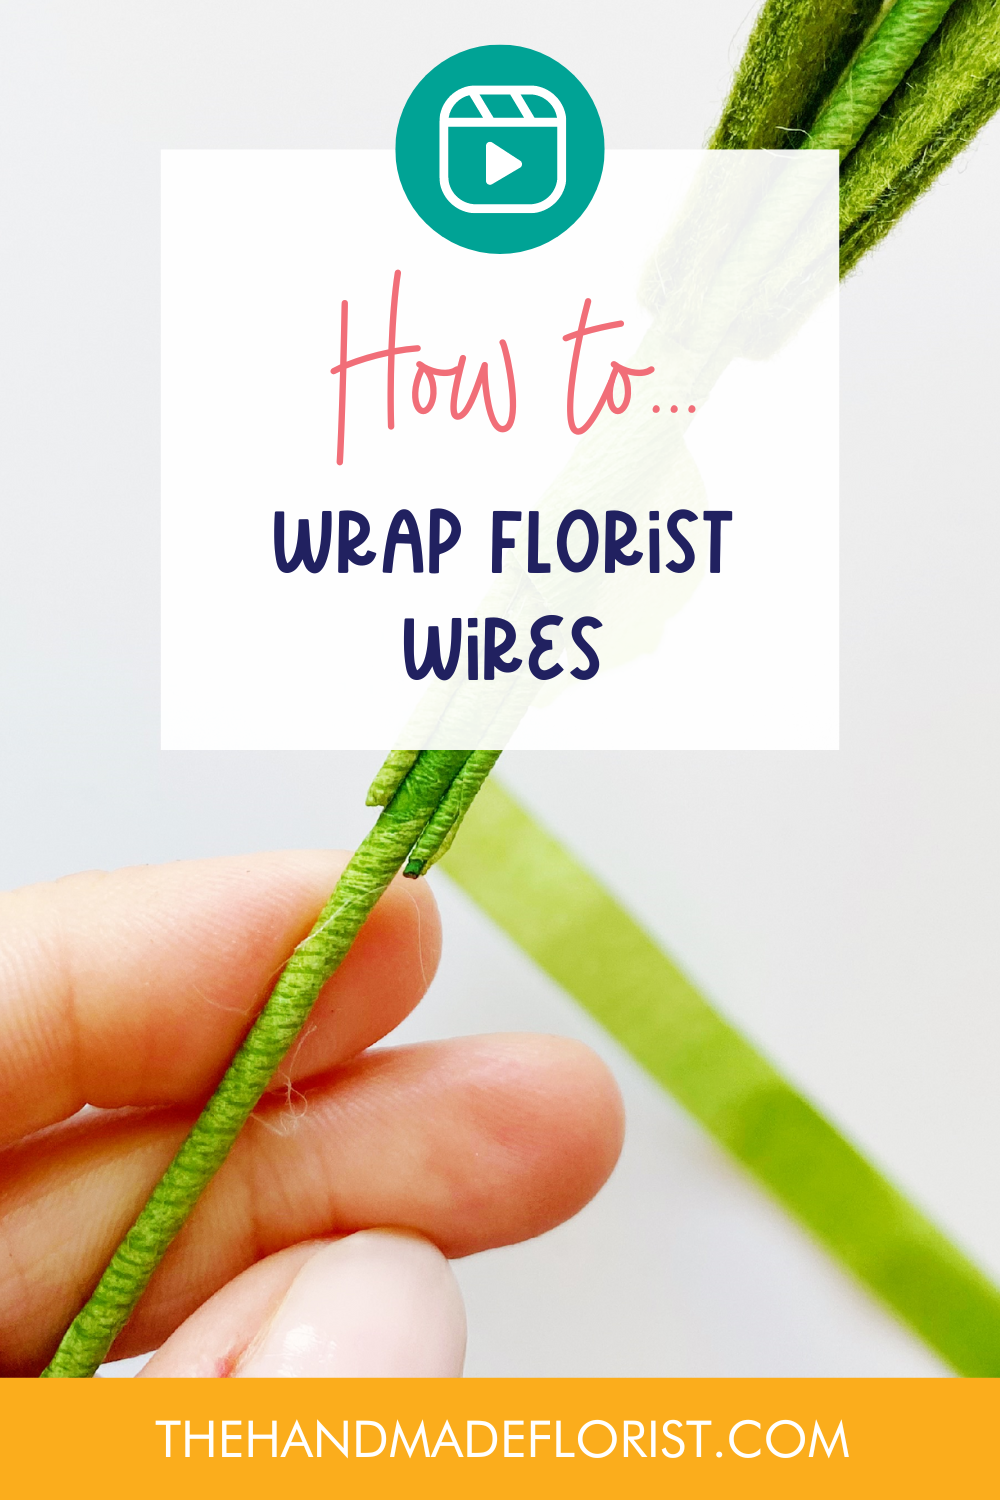 How to wrap florist wires with florist tape